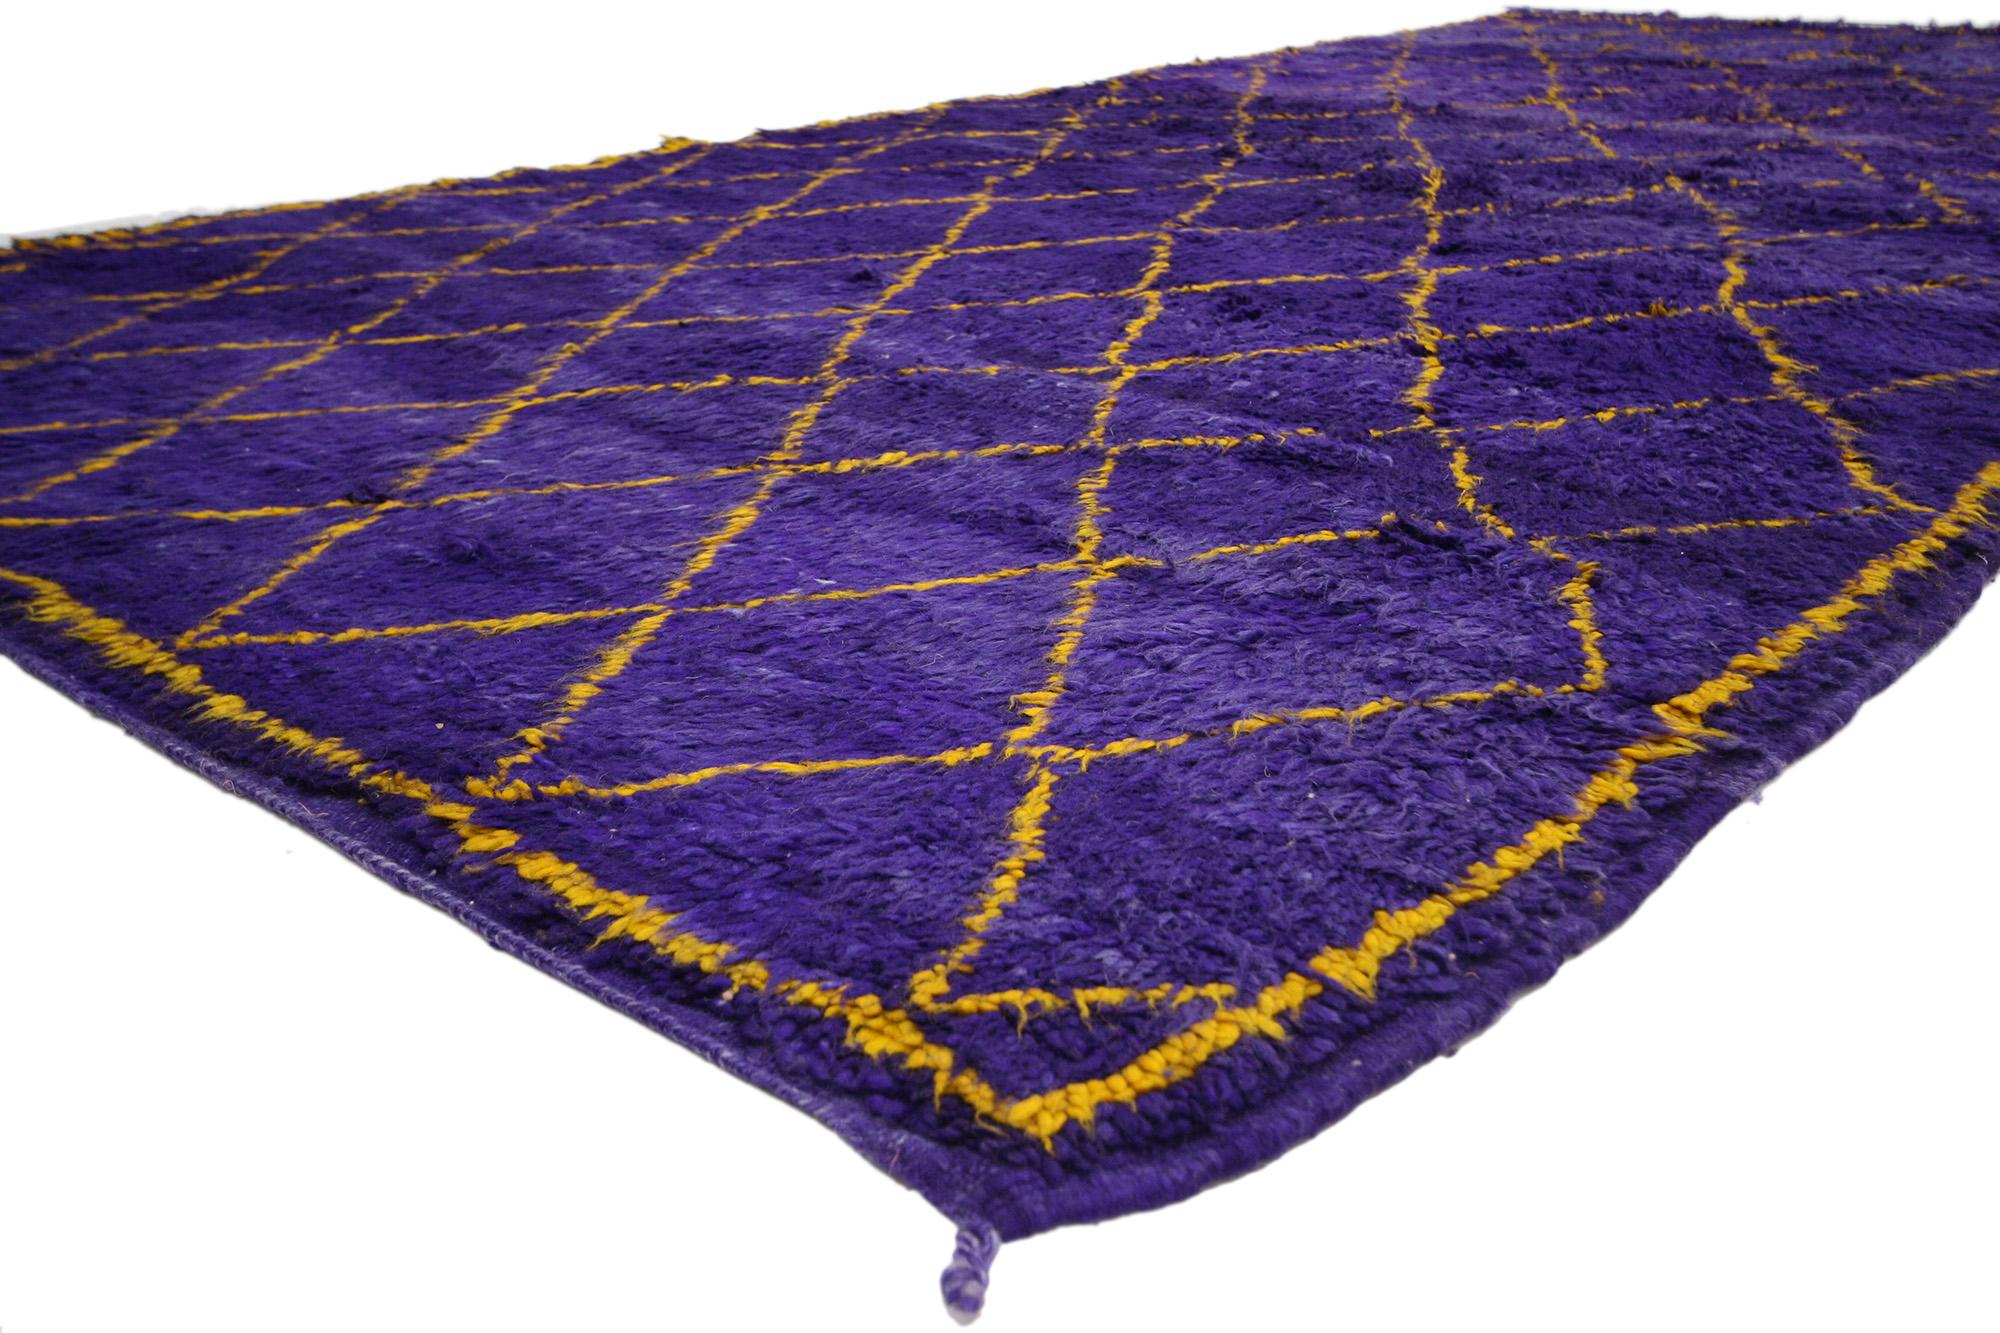 20330 Vintage Purple Moroccan Beni Ourain Rug, 06'08 x 12'10. Originating from the esteemed Beni Ourain tribe in Morocco, these meticulously handcrafted rugs honor tradition with unwavering attention to detail, utilizing untreated sheep's wool to